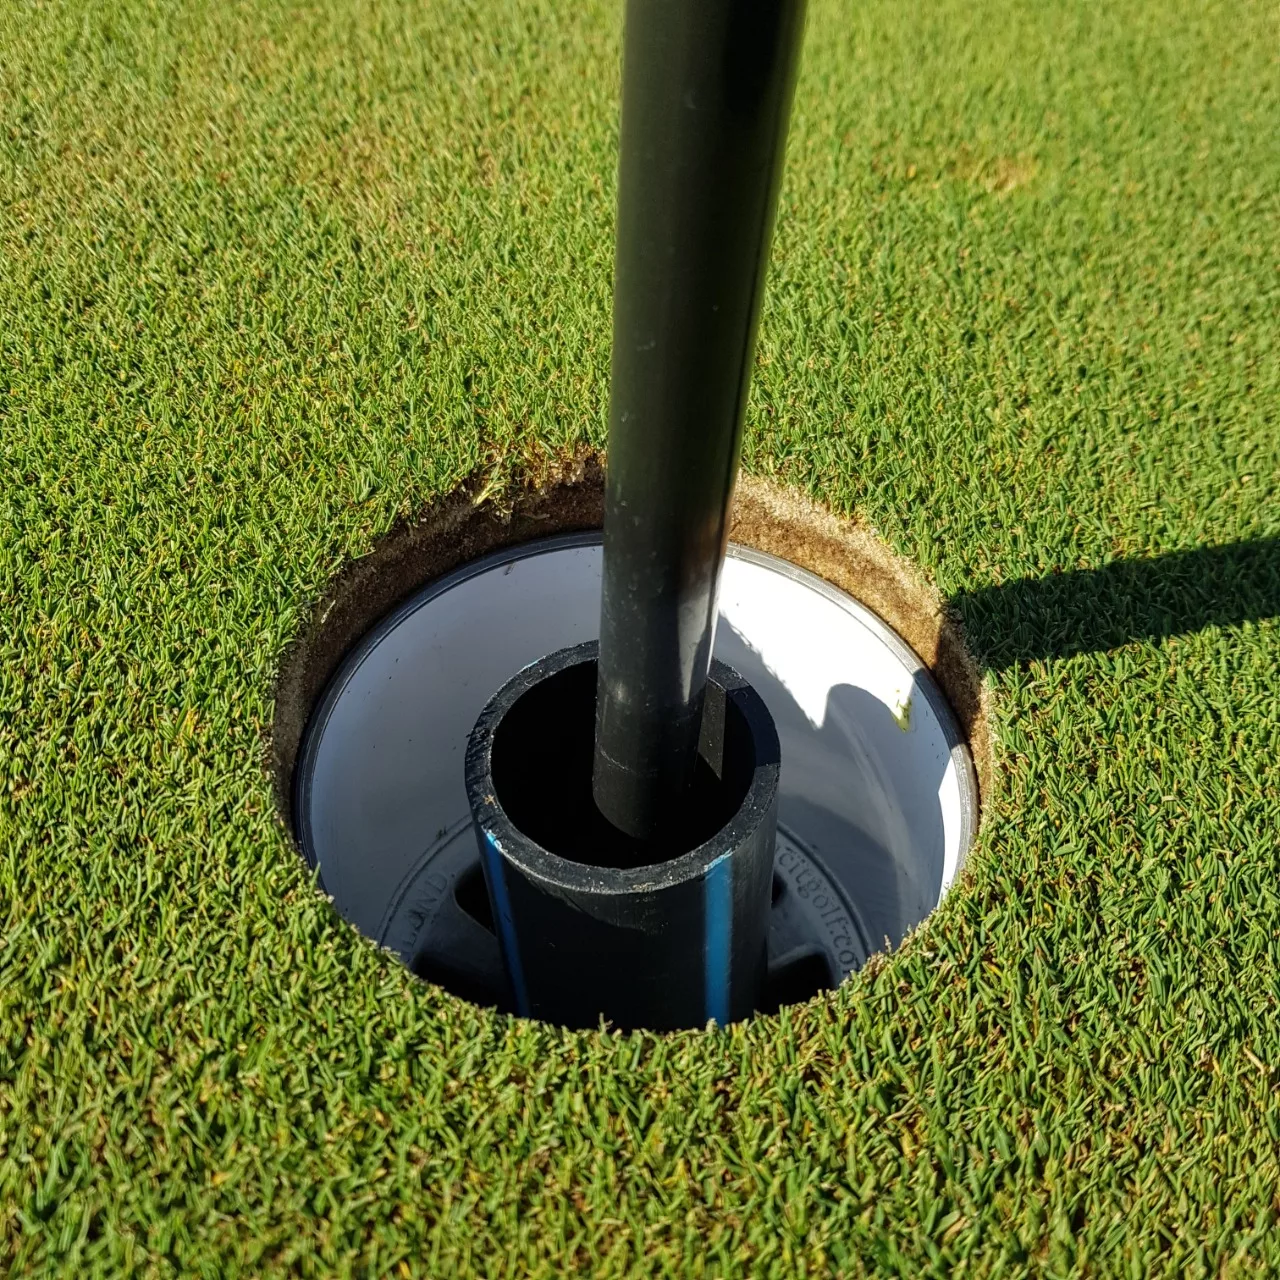 Looking down into a golf hole, with the flag post sticking out, surrounded by green grass.